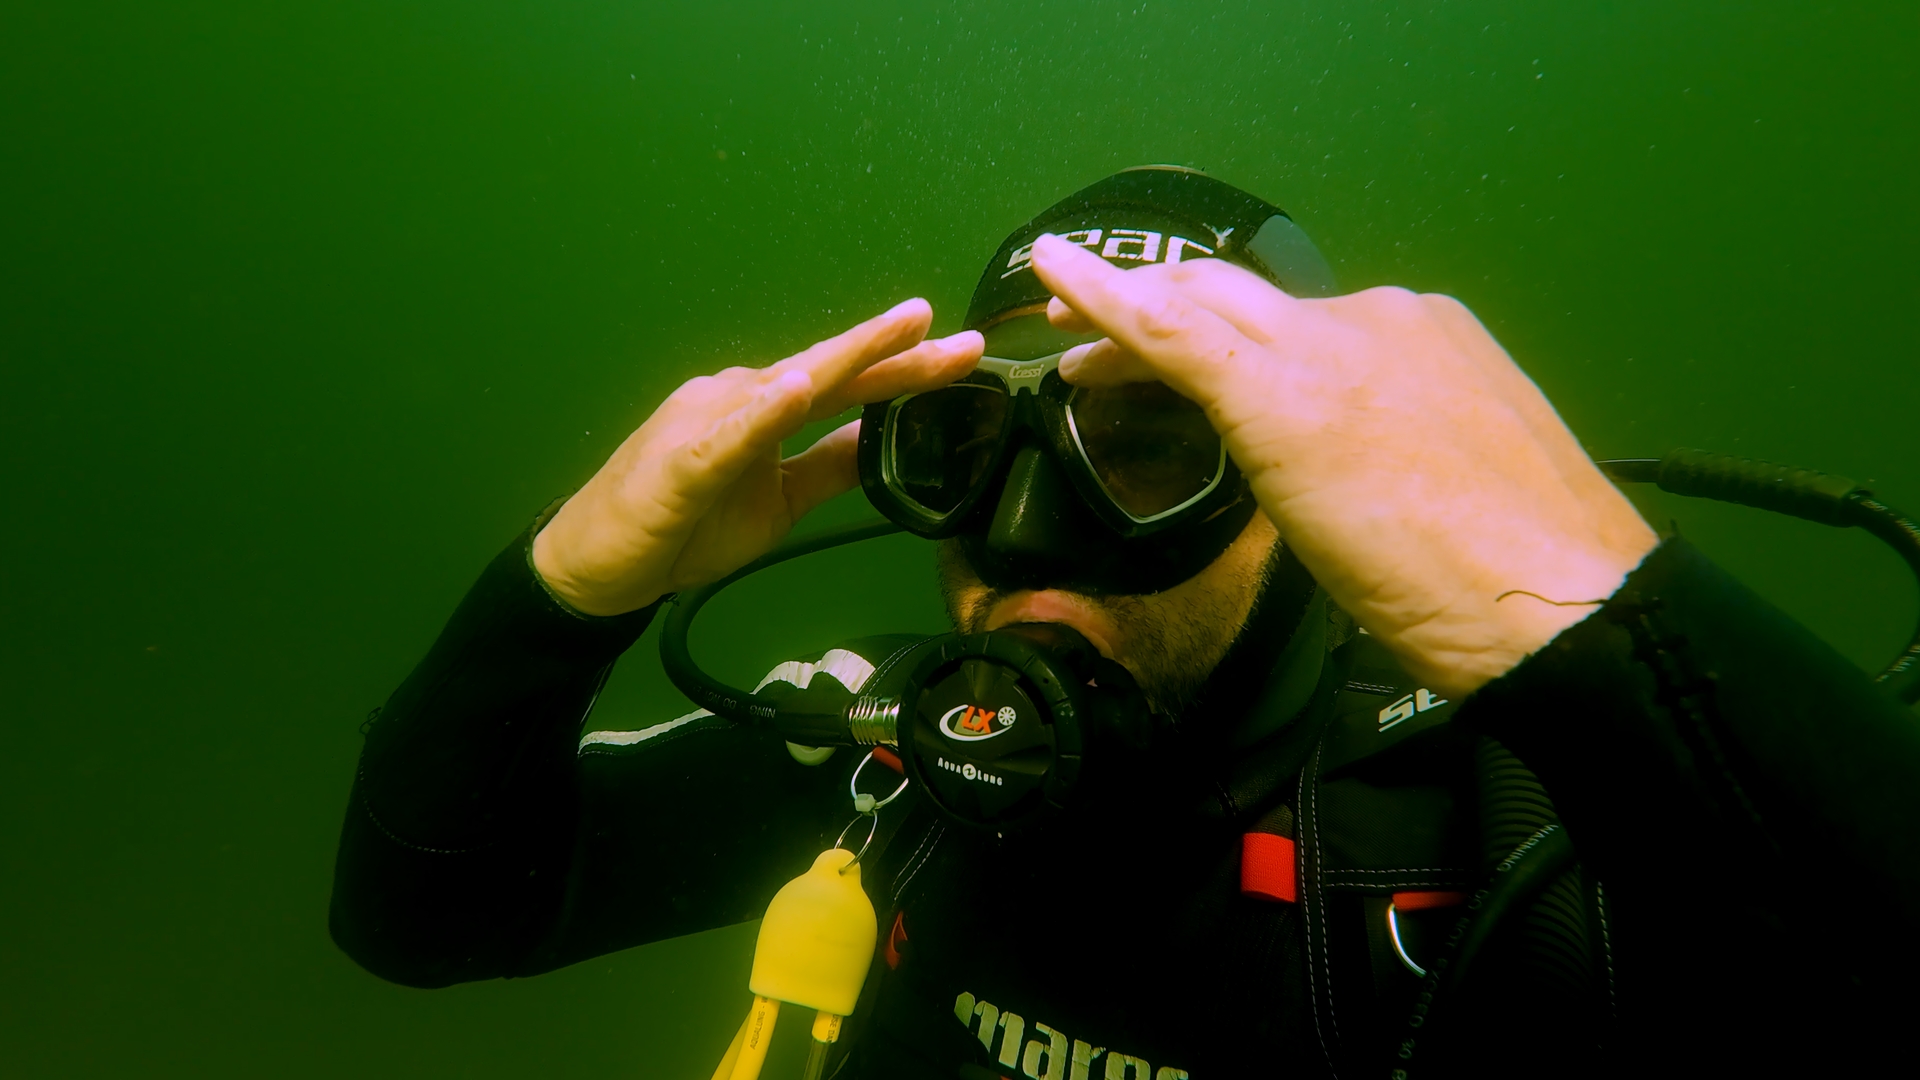 : A Comparative Analysis of Contact Lenses and Prescription Masks for Scuba Diving